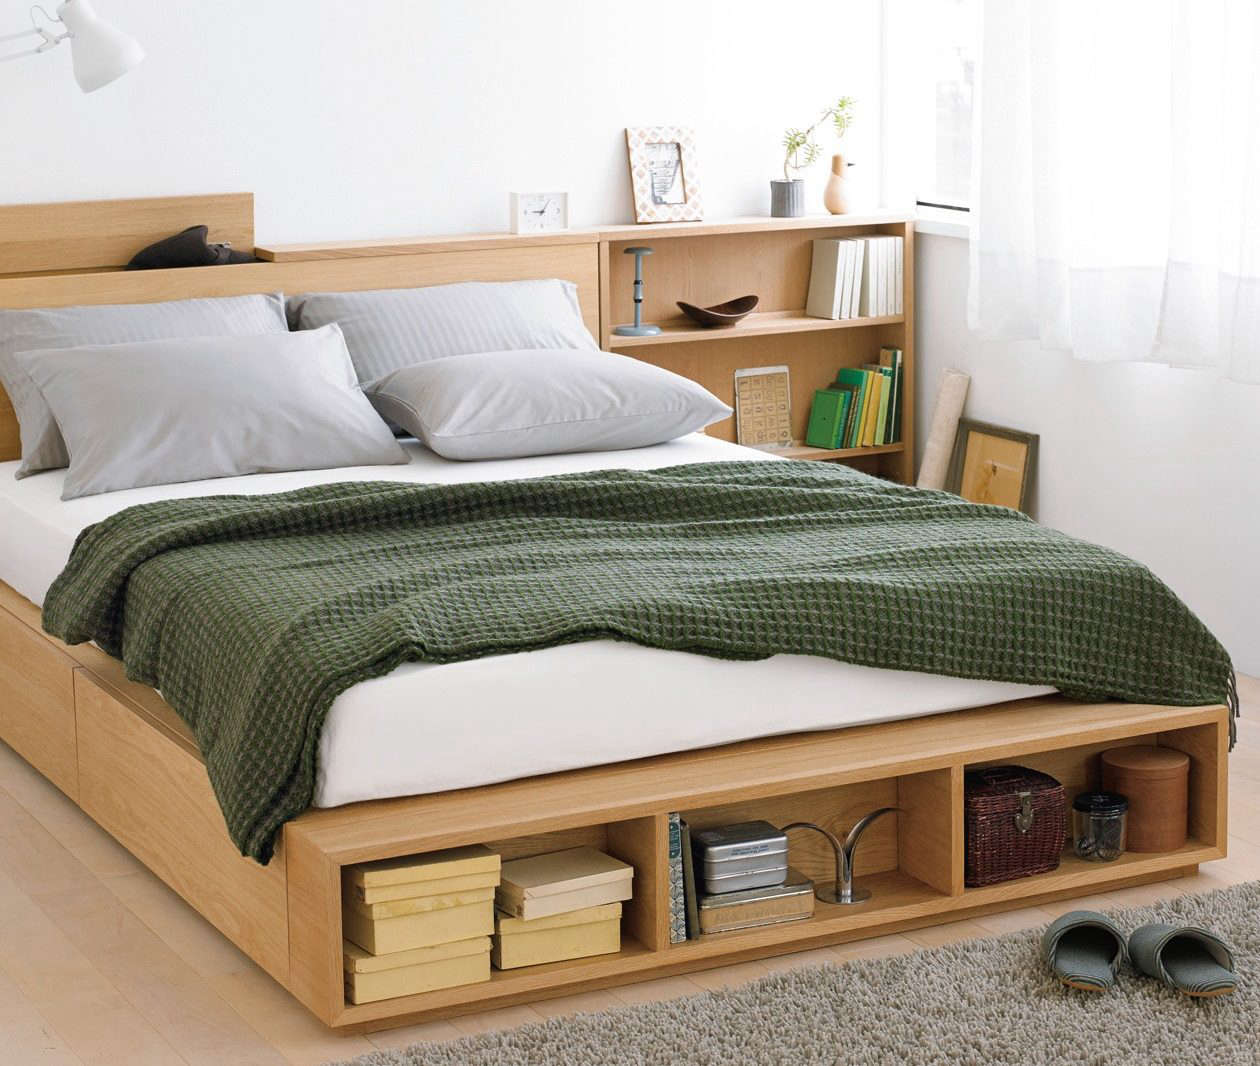 10 Easy Pieces Storage Beds Remodelista, Bed Frames With Storage